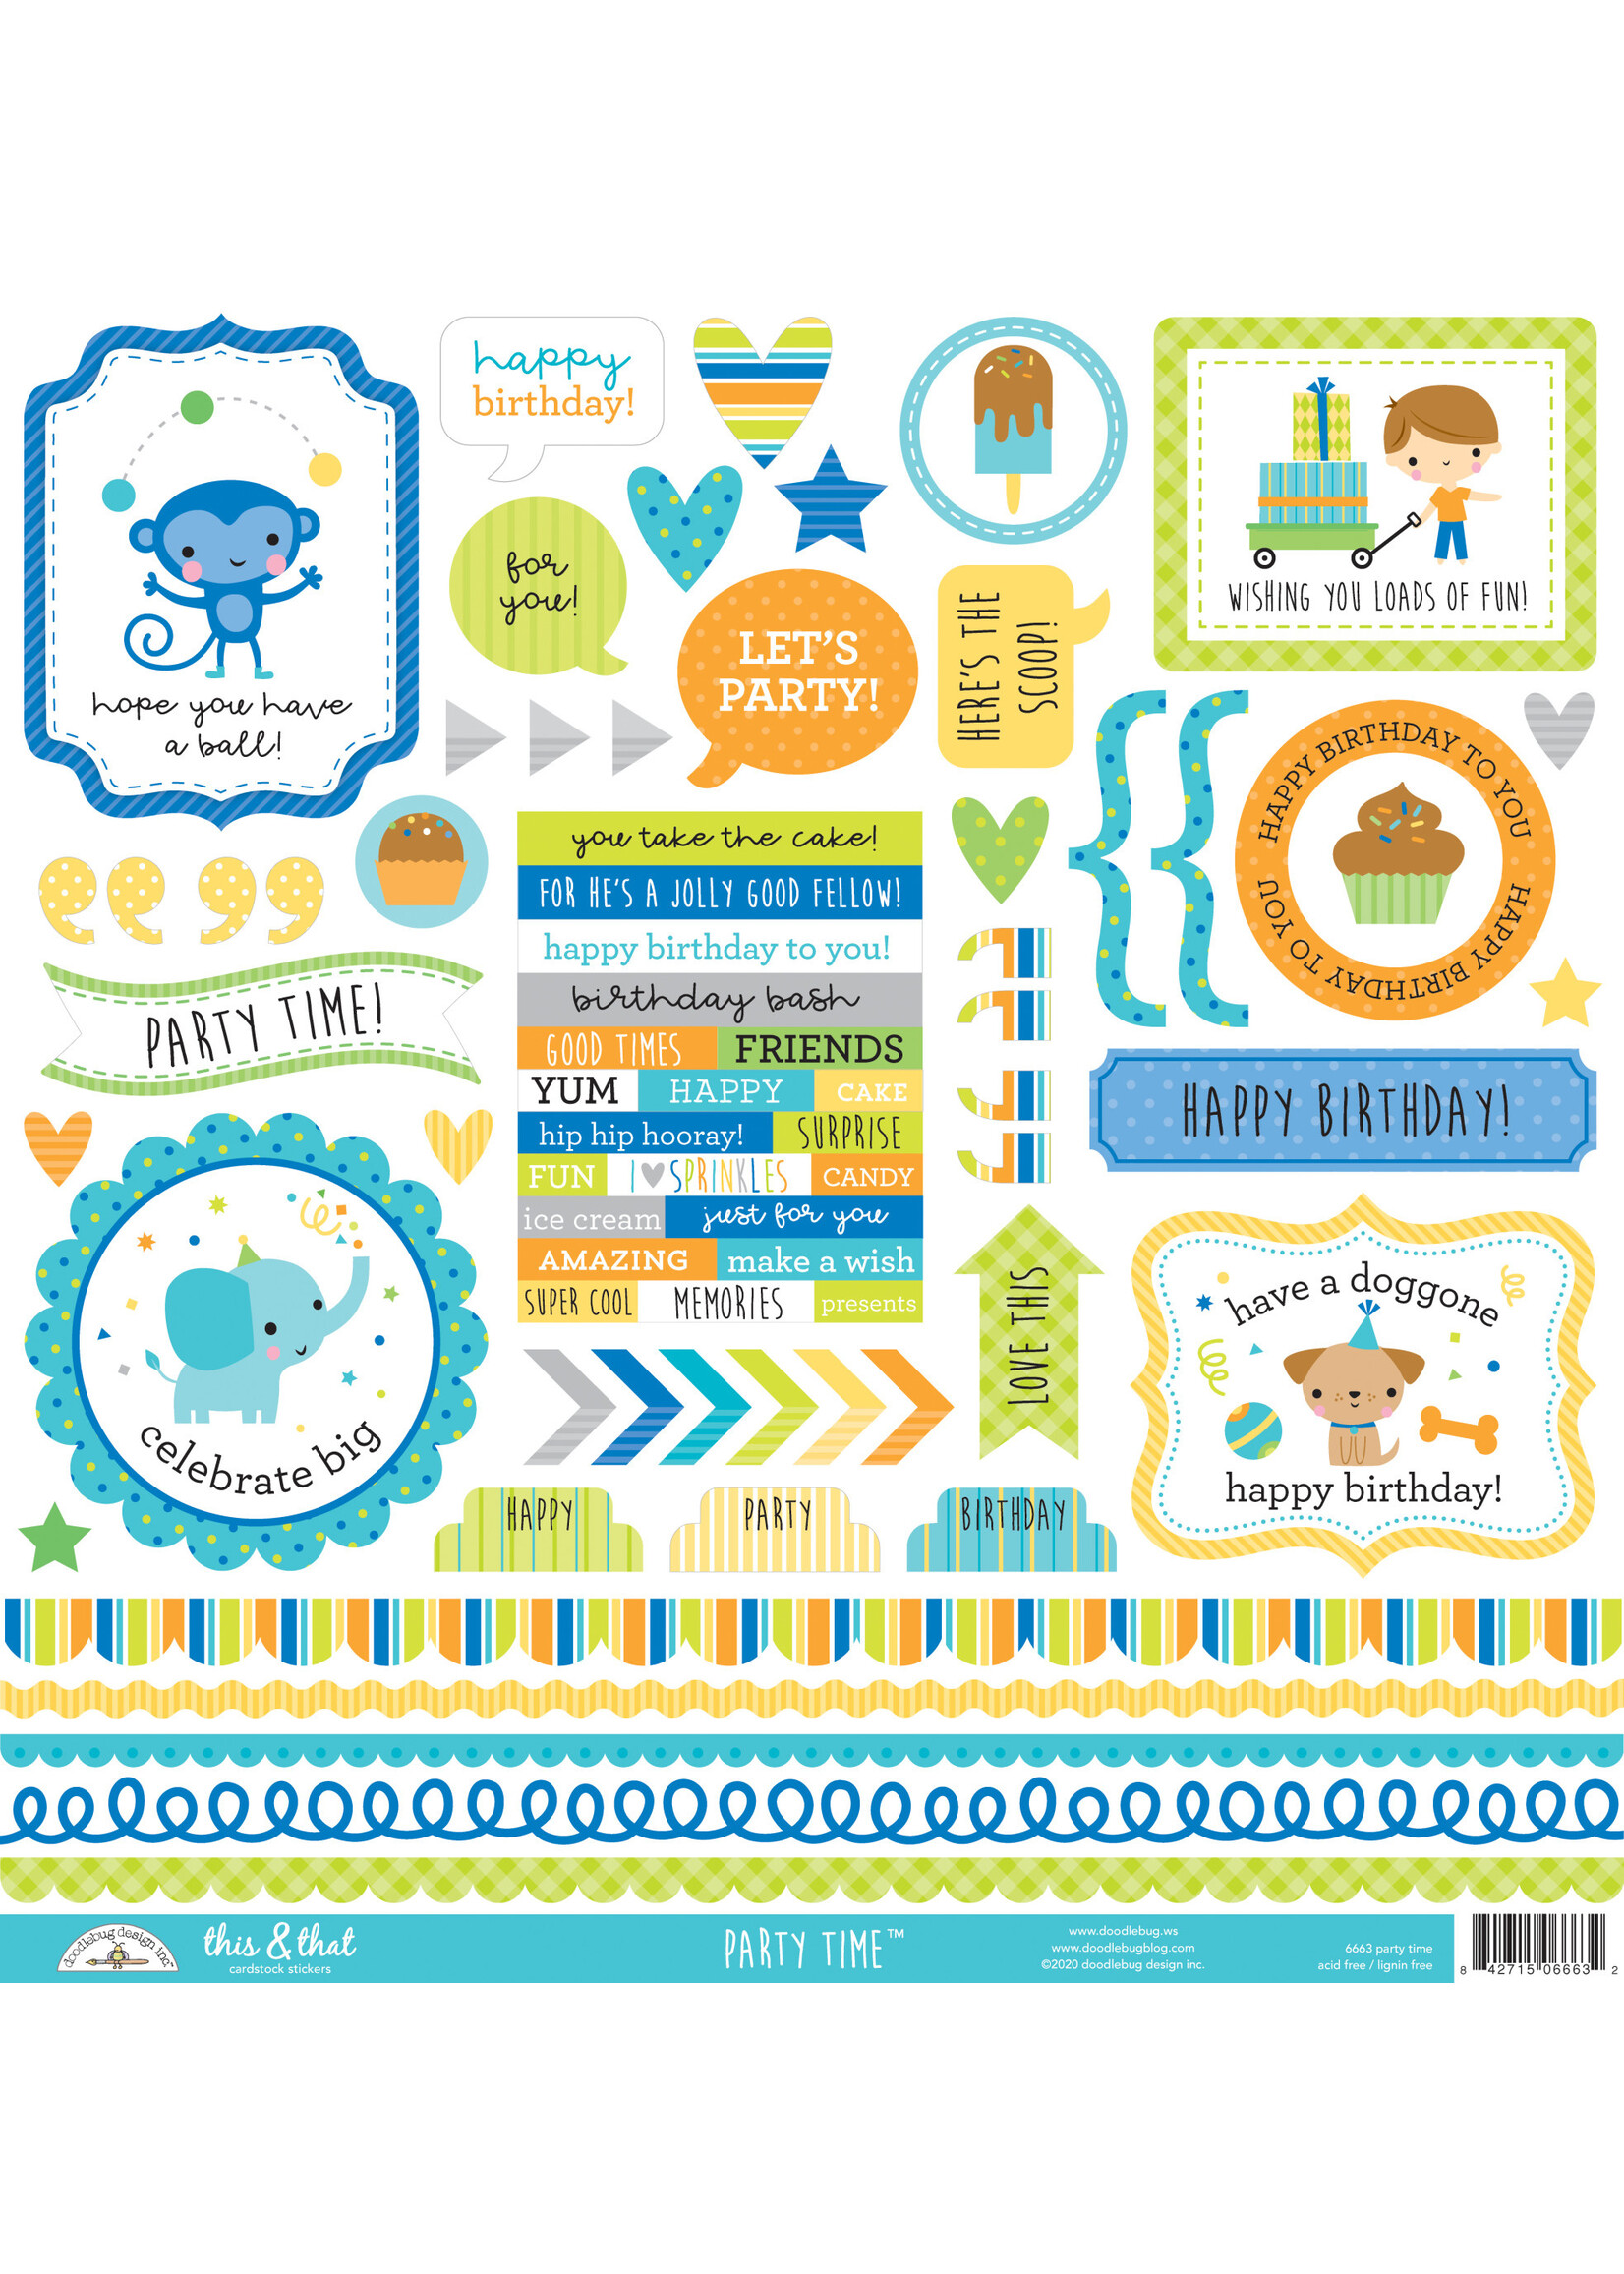 DOODLEBUG Doodlebug party time this & that sticker